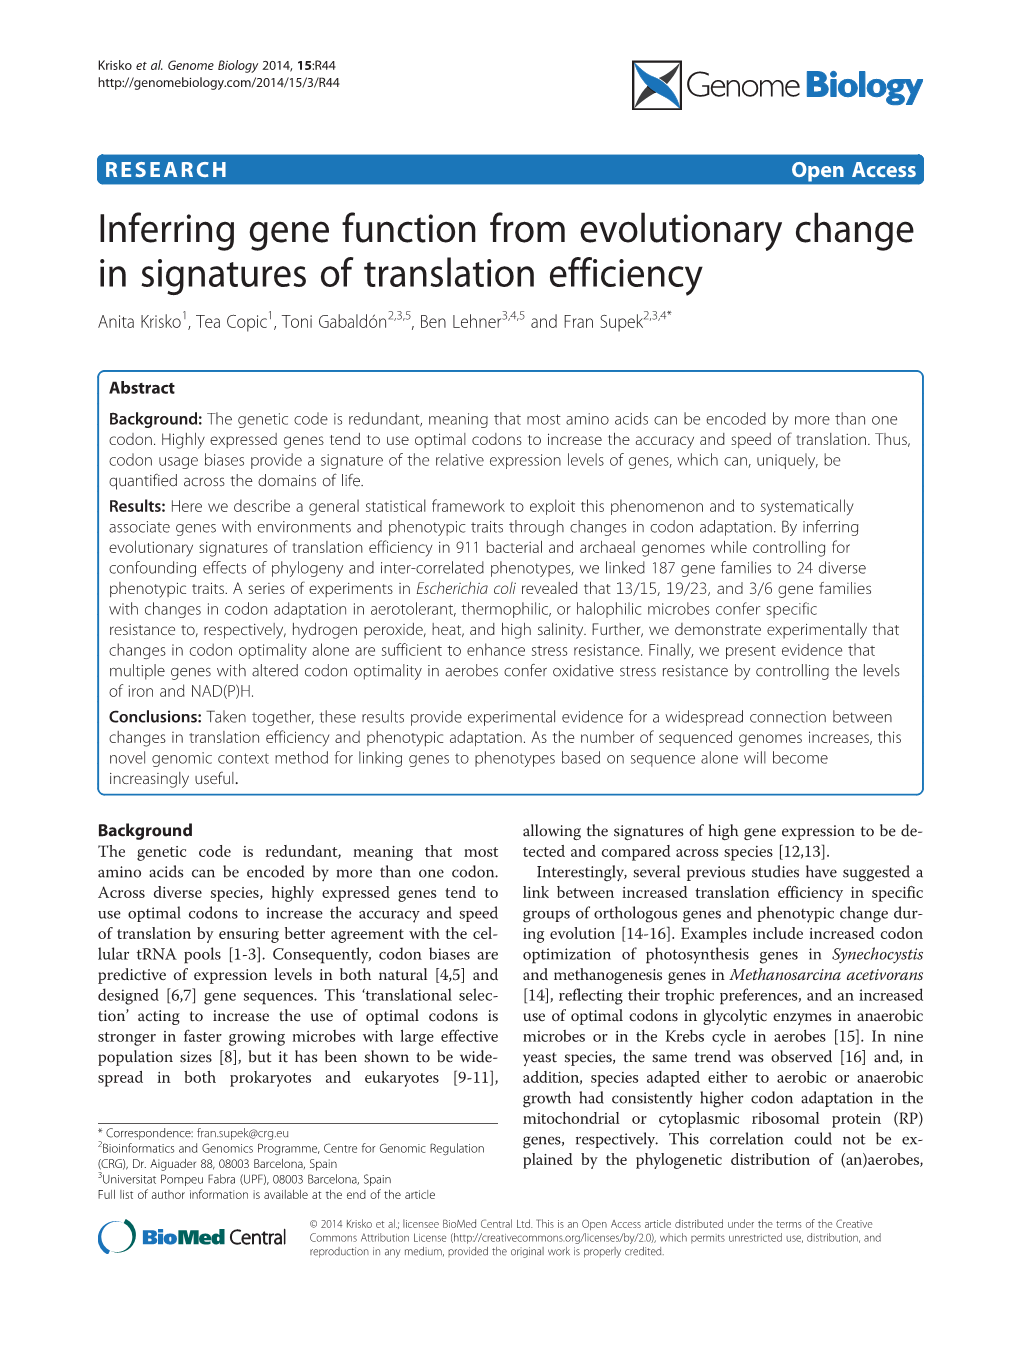 Inferring Gene Function from Evolutionary Change in Signatures